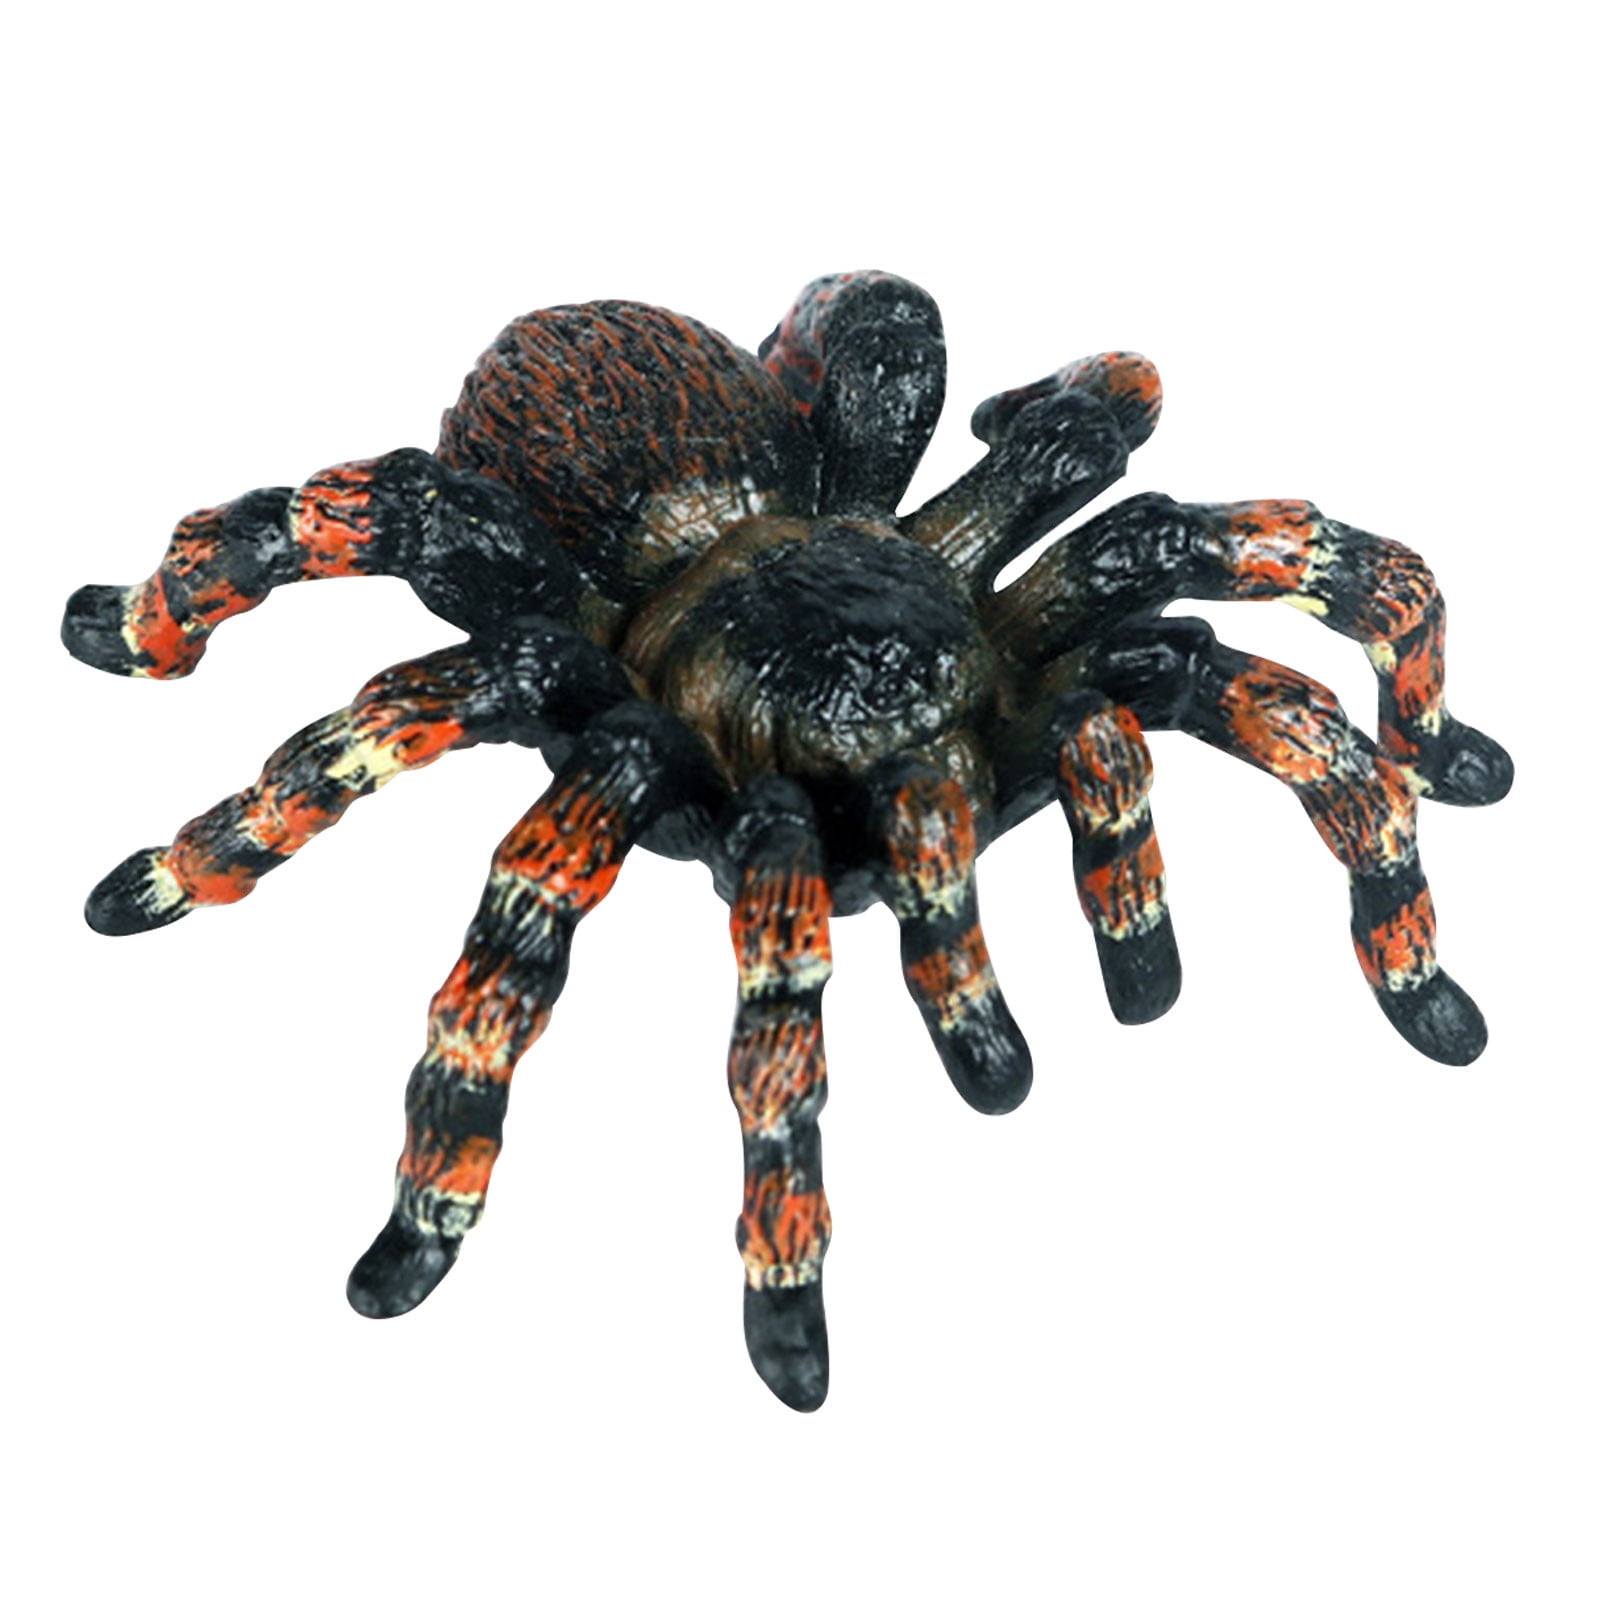 50pcs Realistic Animal Model Tricky Toy Party Favors Spiders Model Kid Black